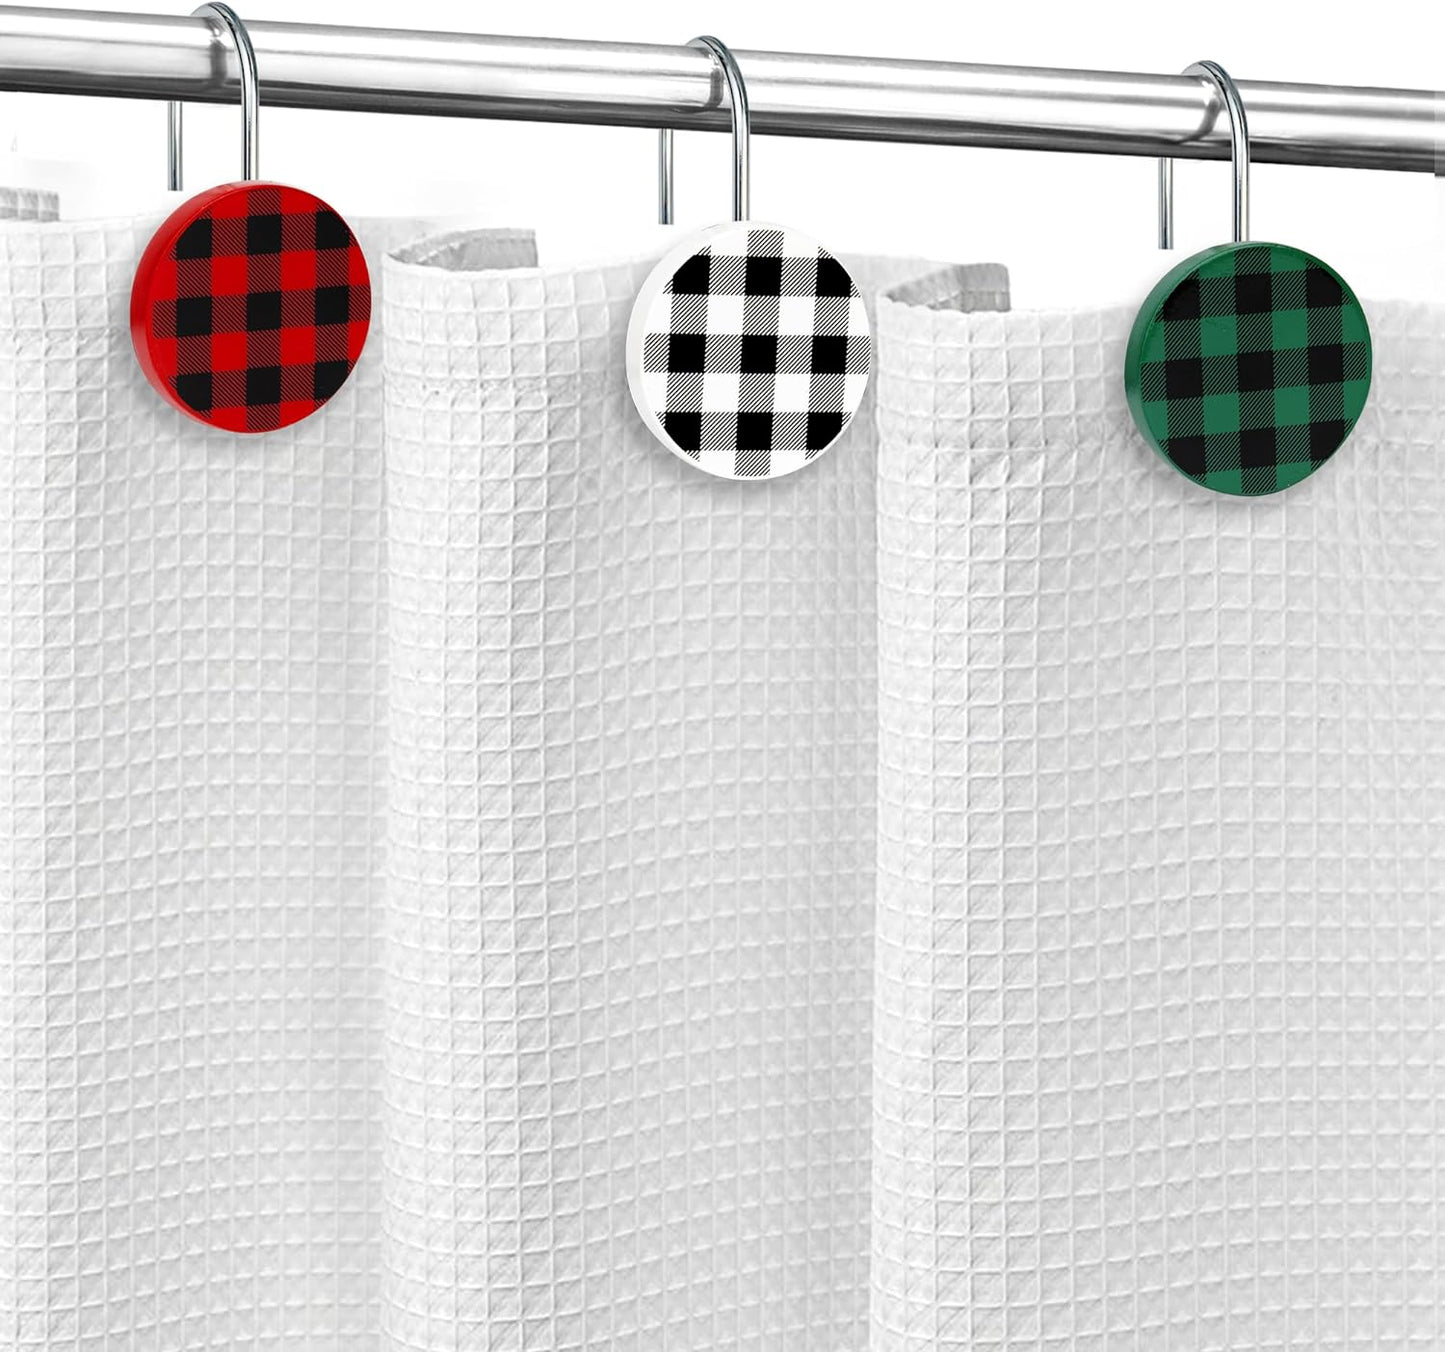 Christmas Decorative Shower Curtain Hooks, Plaid Buffalo Check Shower Curtain Rings, Xmas Classic Decor for Bathroom Home, Round Shower Curtain Hangers, Set of 12, White Black Red Green